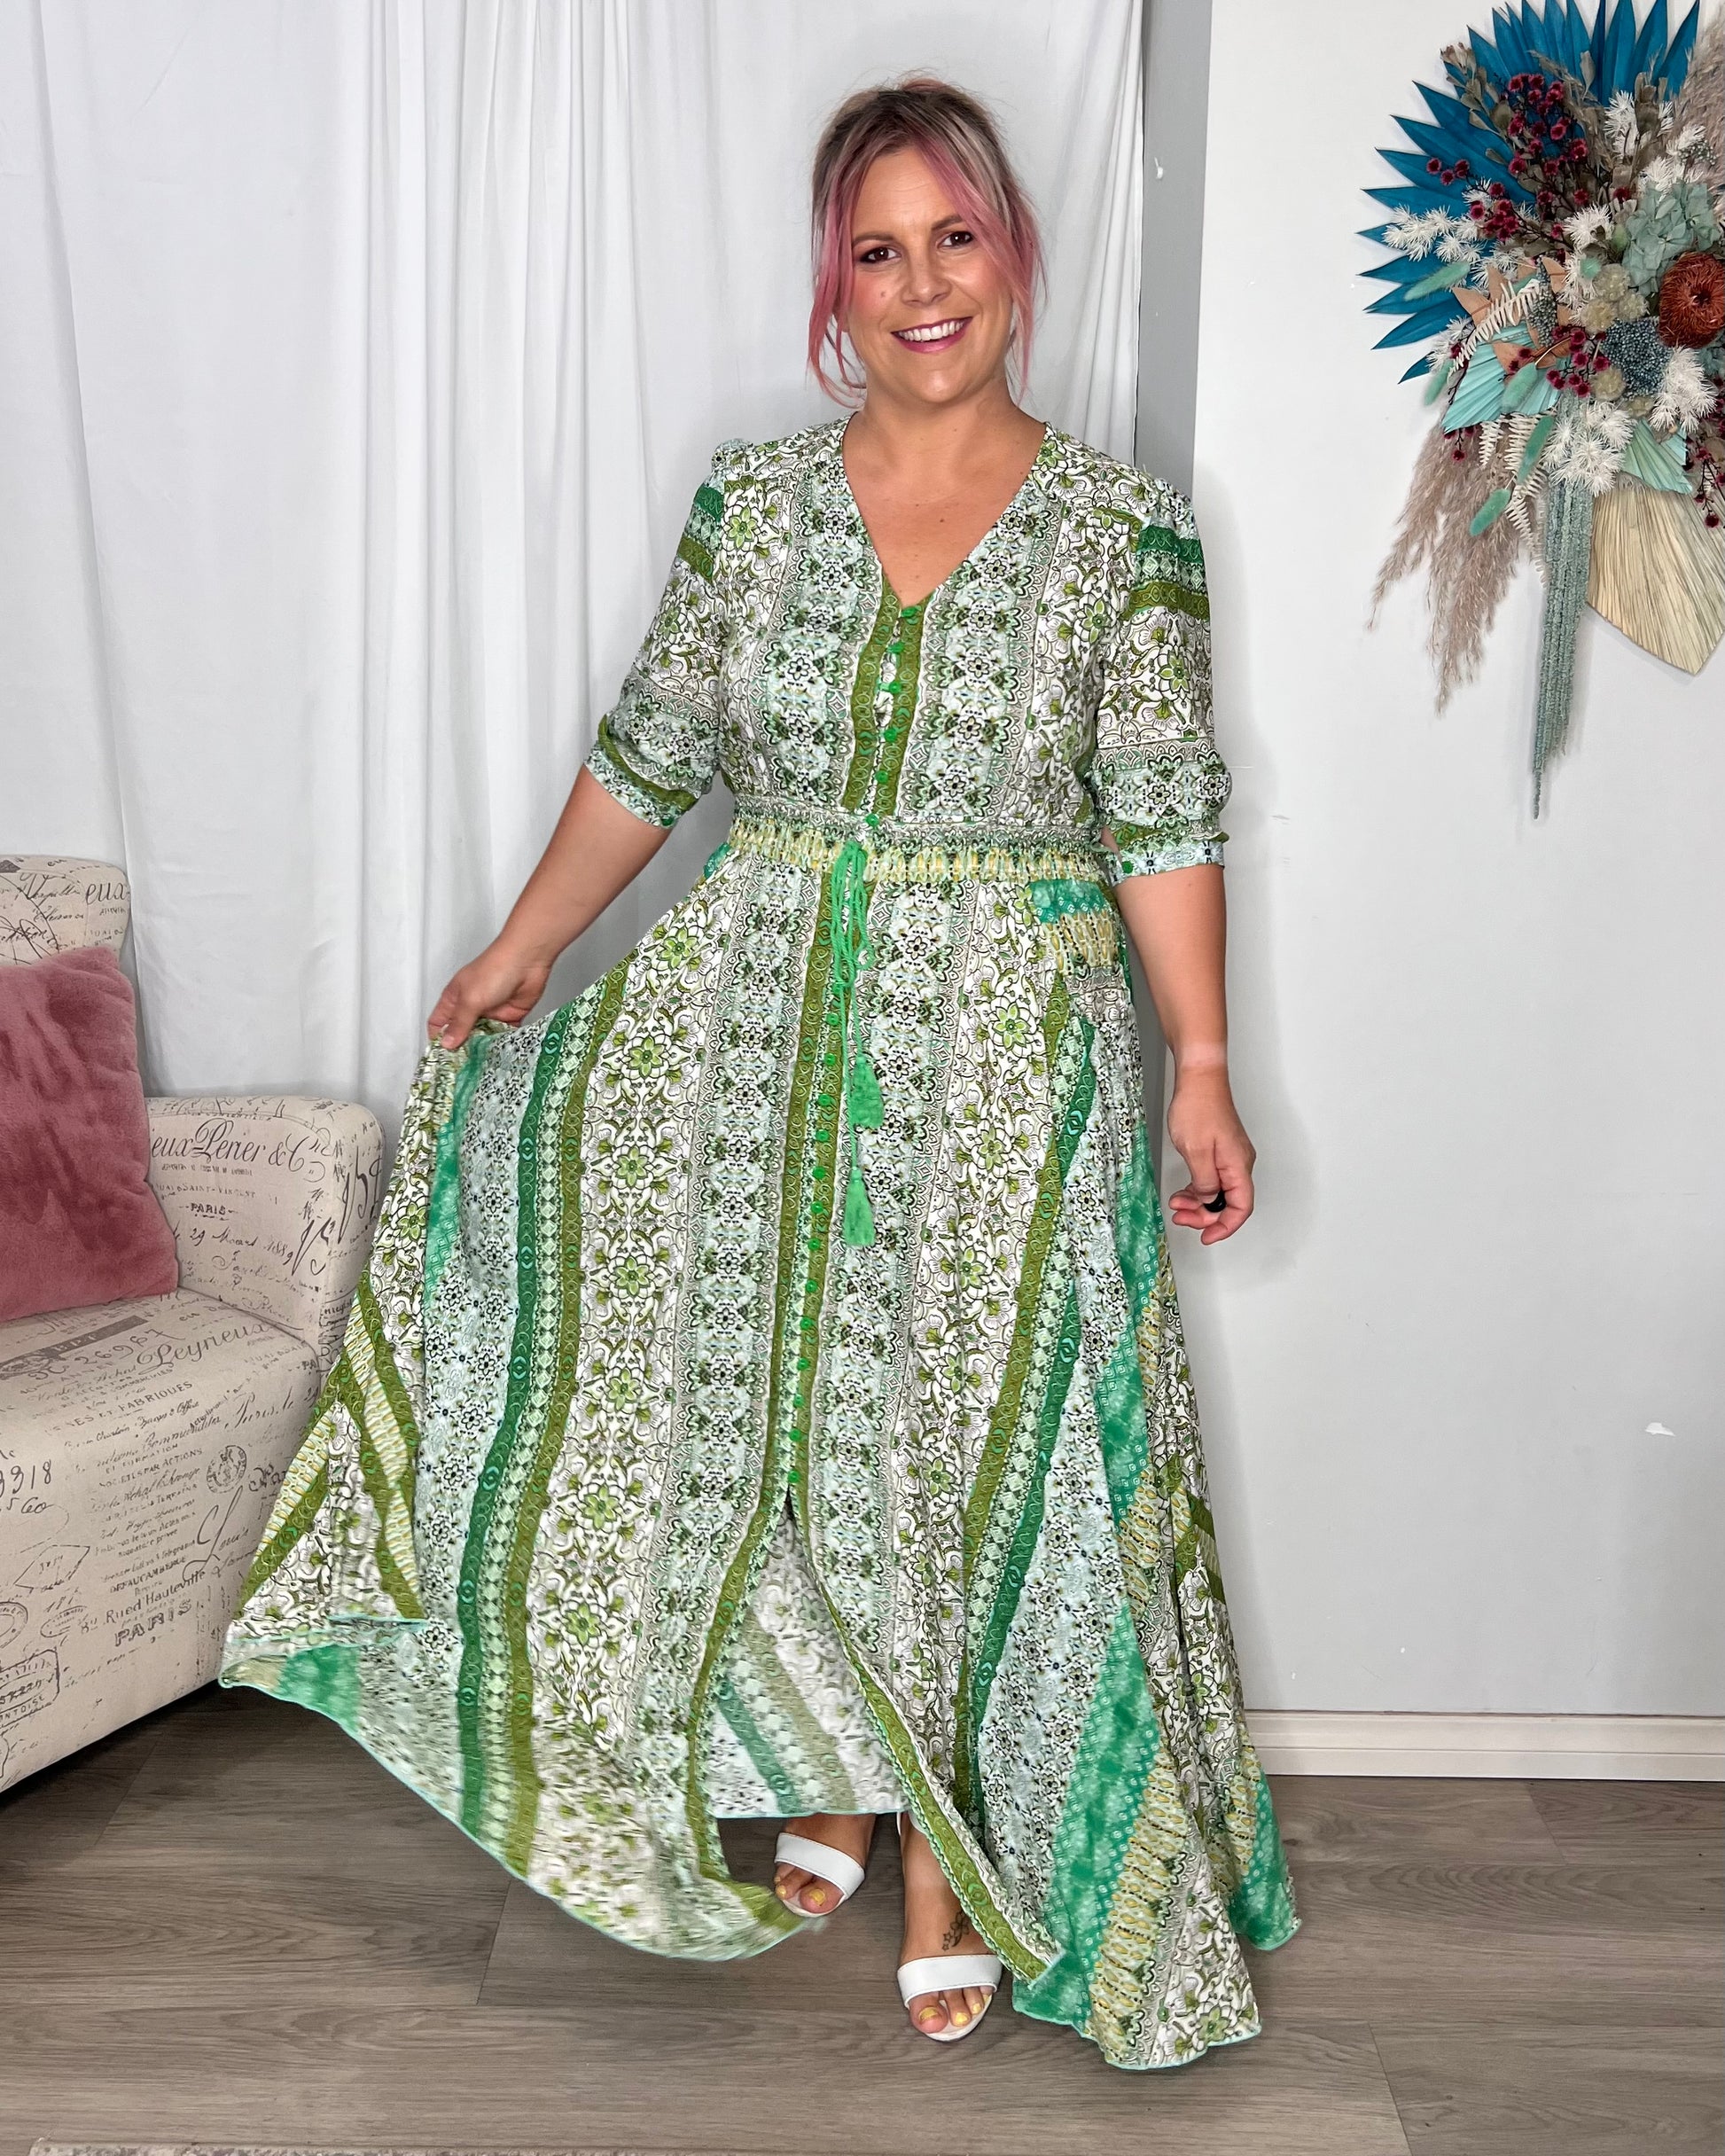 **NEW** Arlith Dress: The Arlith Dress features a perfect mix green shades in a soft floral print, to bring a new colourway to our most popular style dress (Bailey!)
Features:

Below elbo - Ciao Bella Dresses - Dreamcatcher